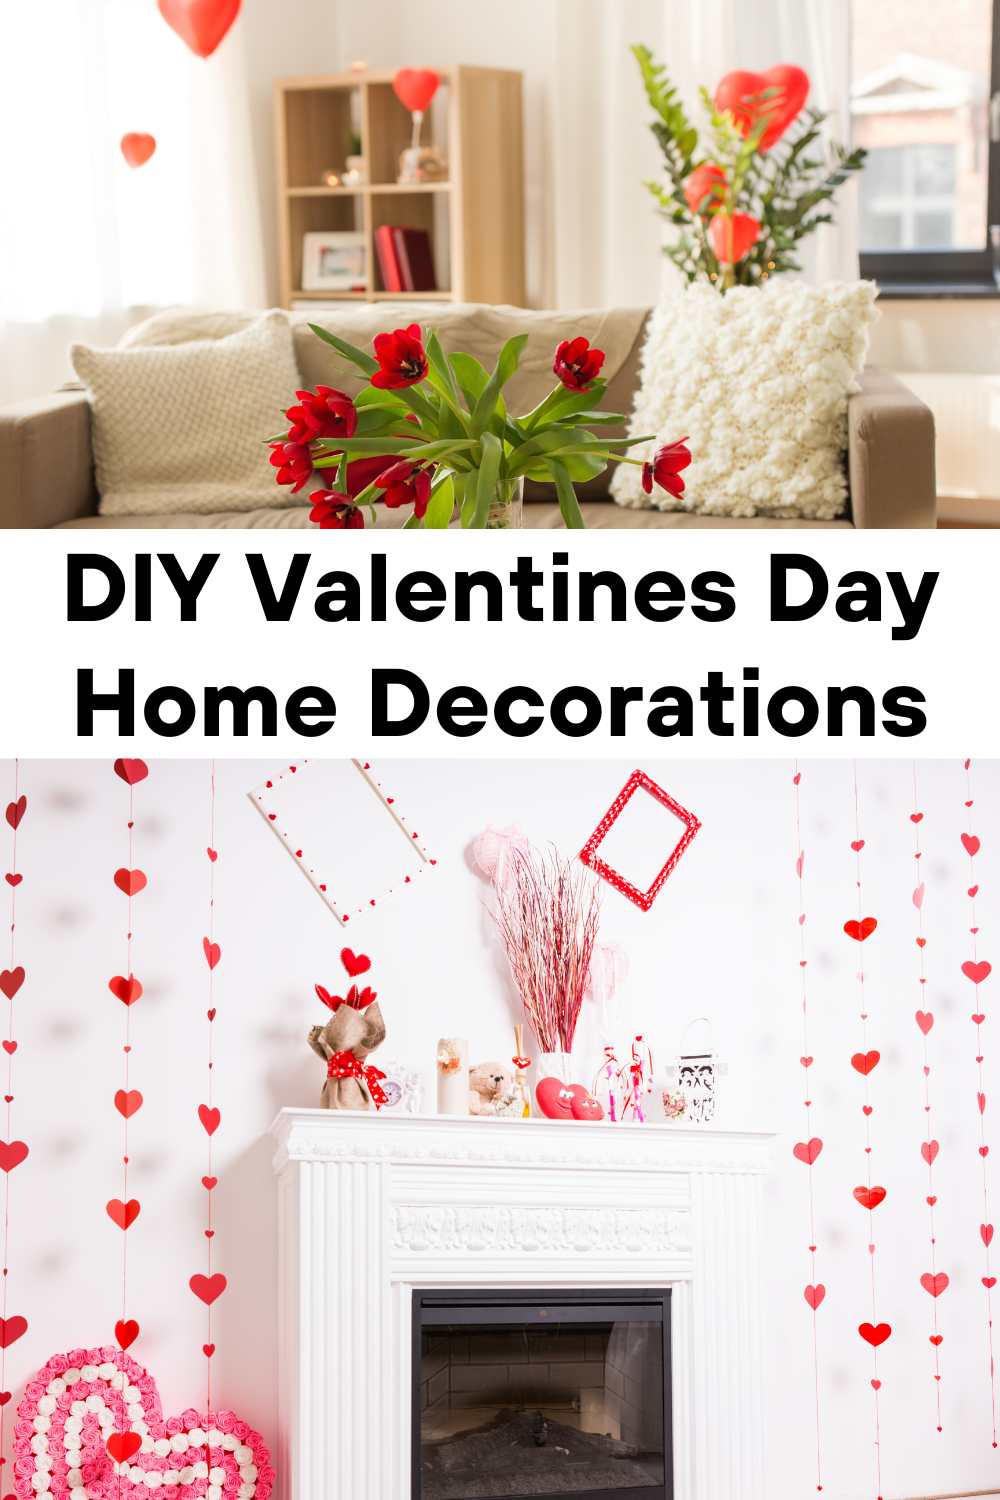 14 DIY Valentine's Day Gift Boxes To Make Now - Shelterness